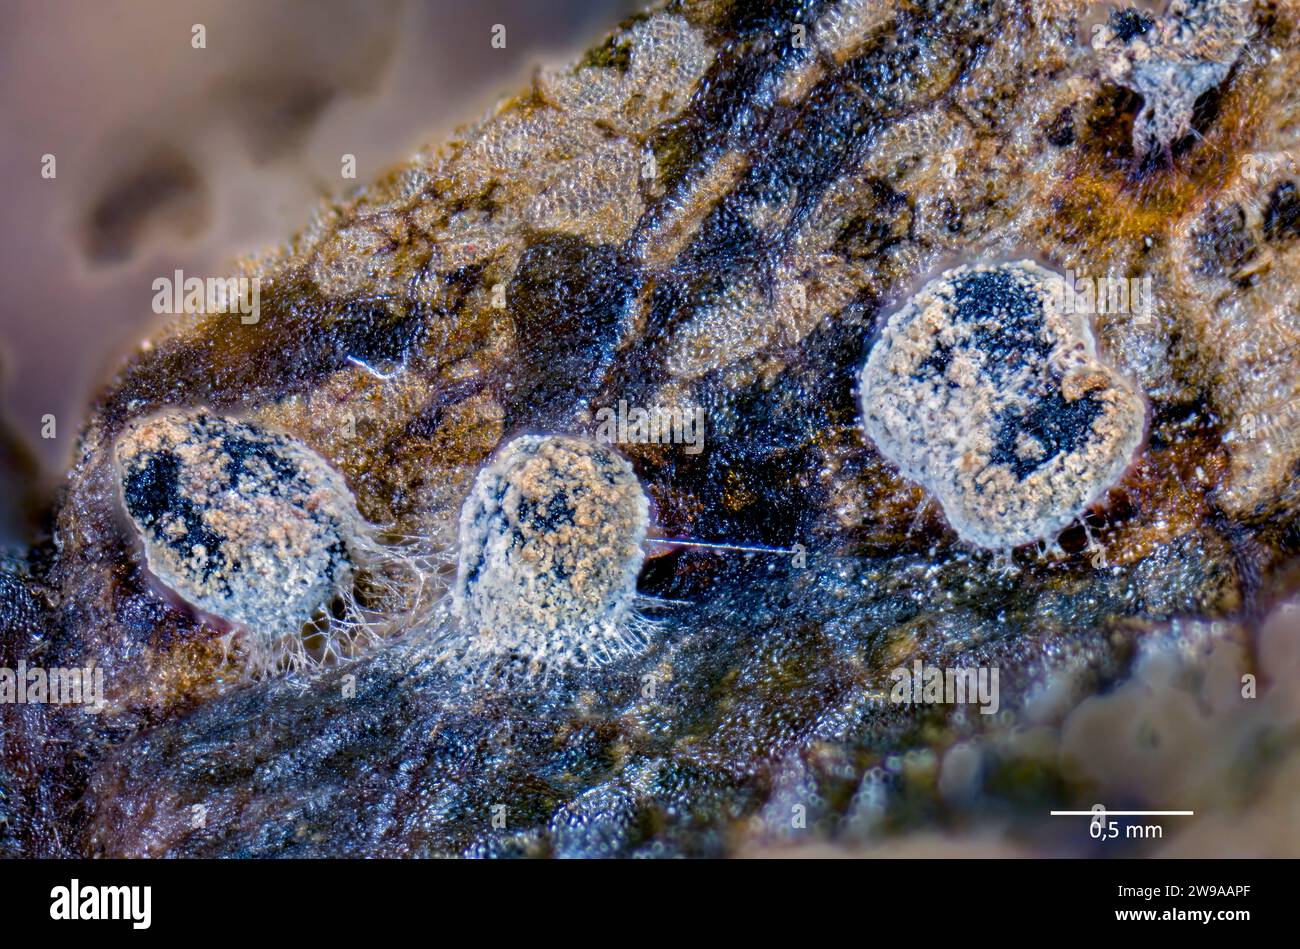 Slime mold sporocarps (Lepidoderma sp., probably L. tigrinum) growing on a decaying leaf (Acer sp.). Stock Photo